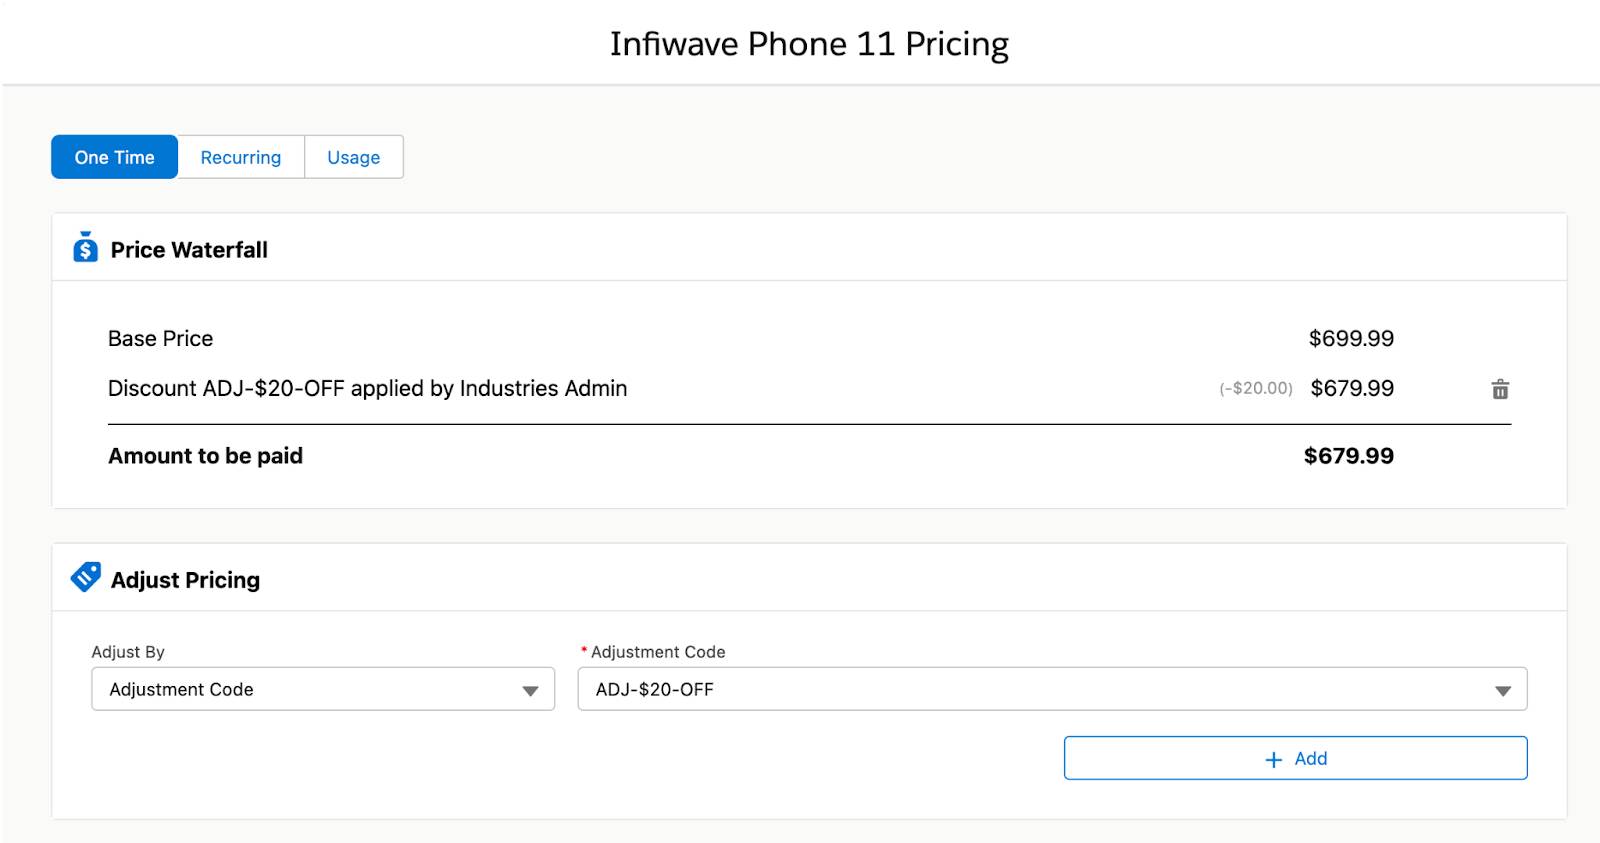 Infiwave Phone 11 Pricing dialog showing the Price Waterfall and Adjust Pricing sections.